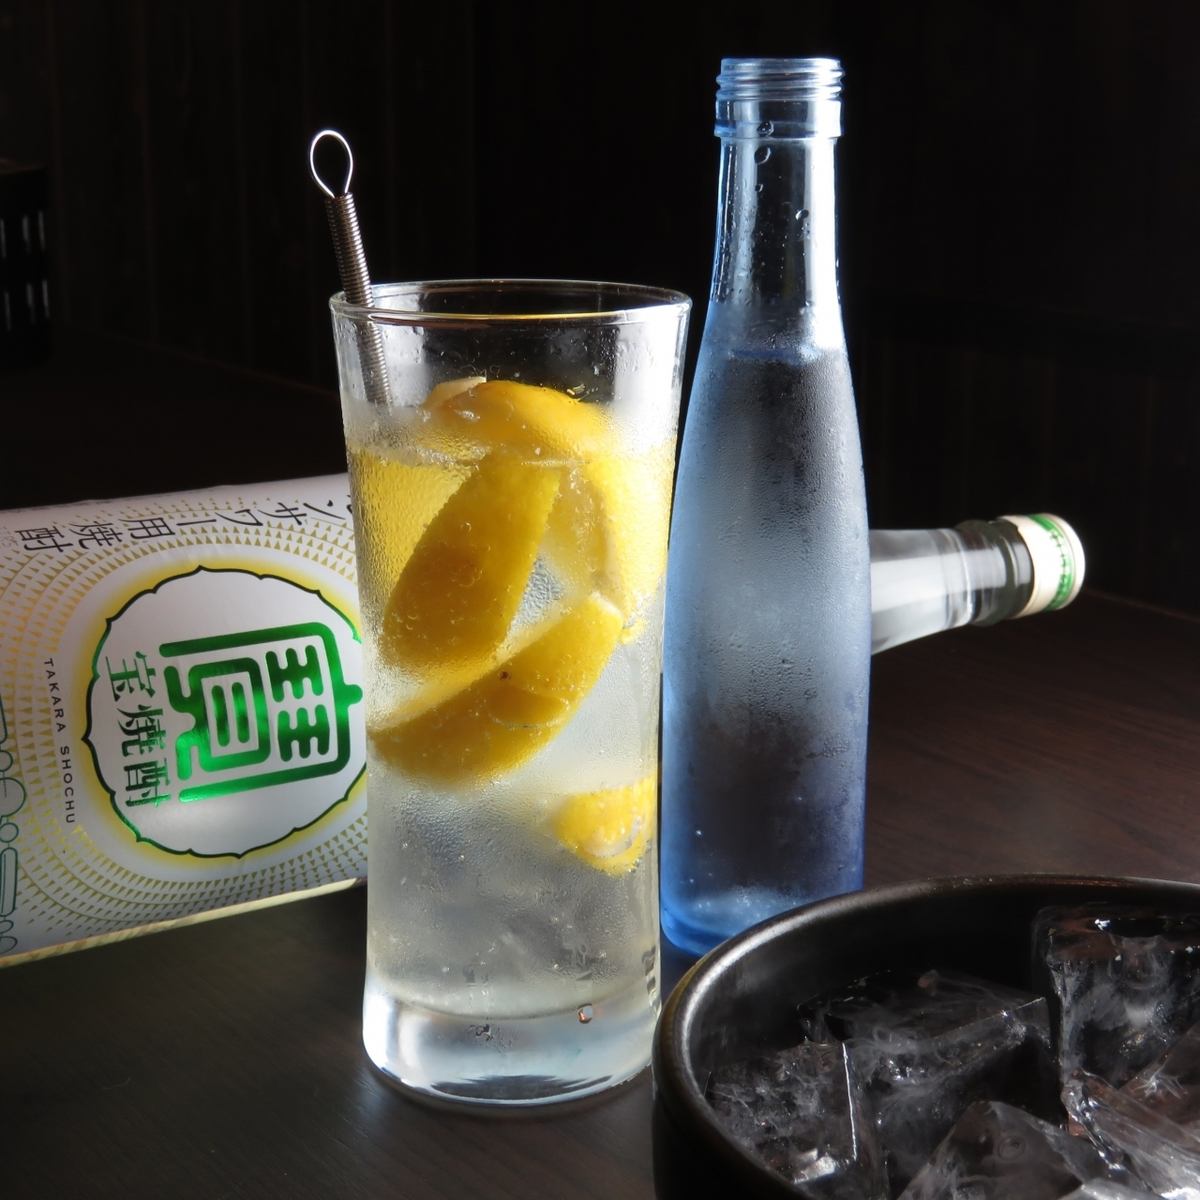 We have a wide variety of alcoholic beverages that go well with Yakiniku ♪ Please feel free to take advantage of our all-you-can-drink service ♪